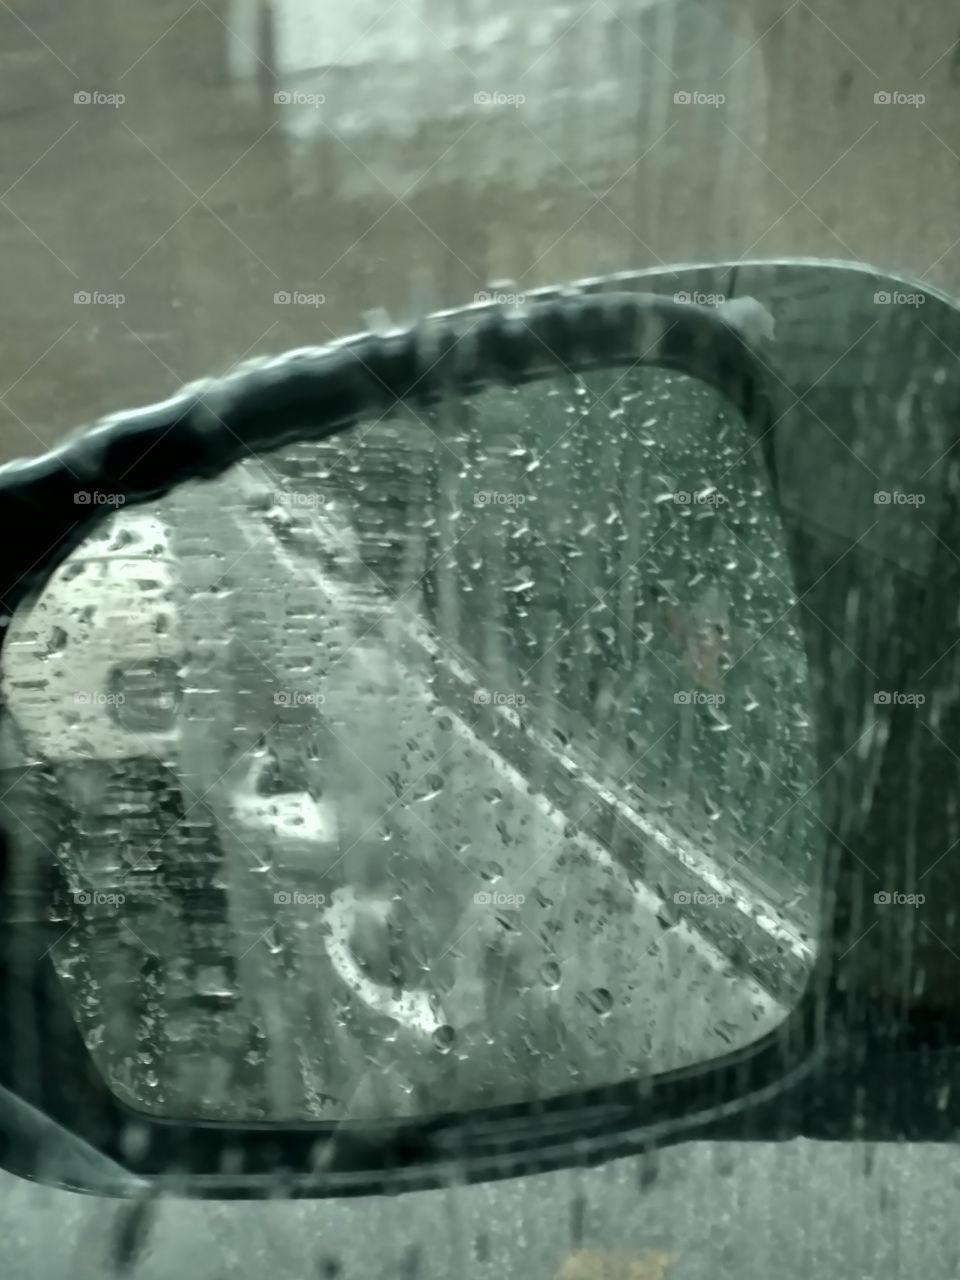 Rain on window with mirror in background